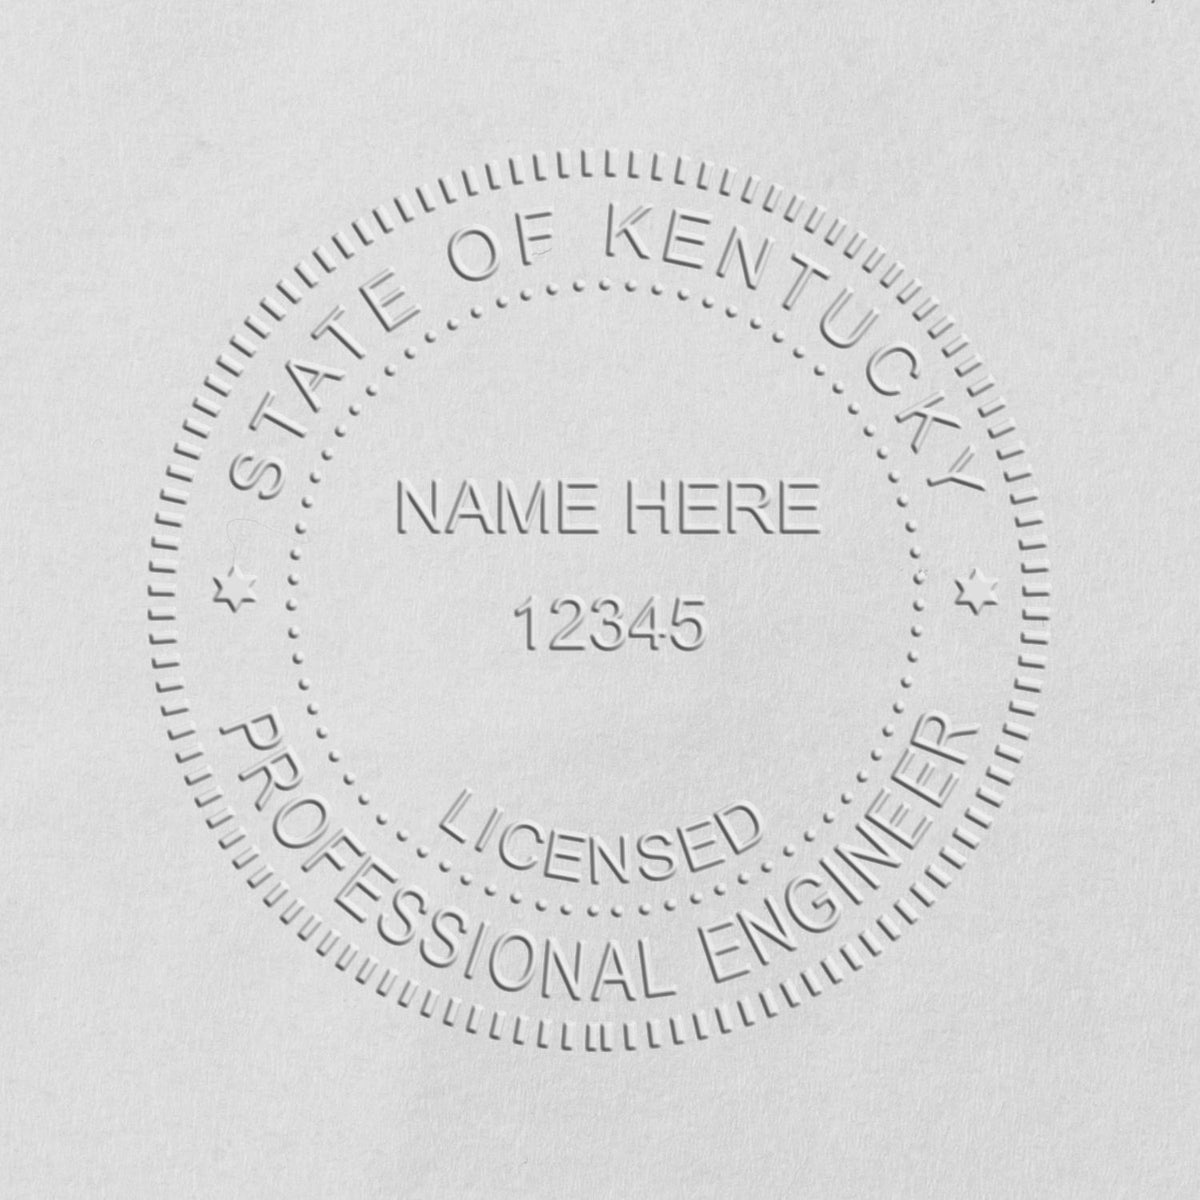 A stamped impression of the Long Reach Kentucky PE Seal in this stylish lifestyle photo, setting the tone for a unique and personalized product.